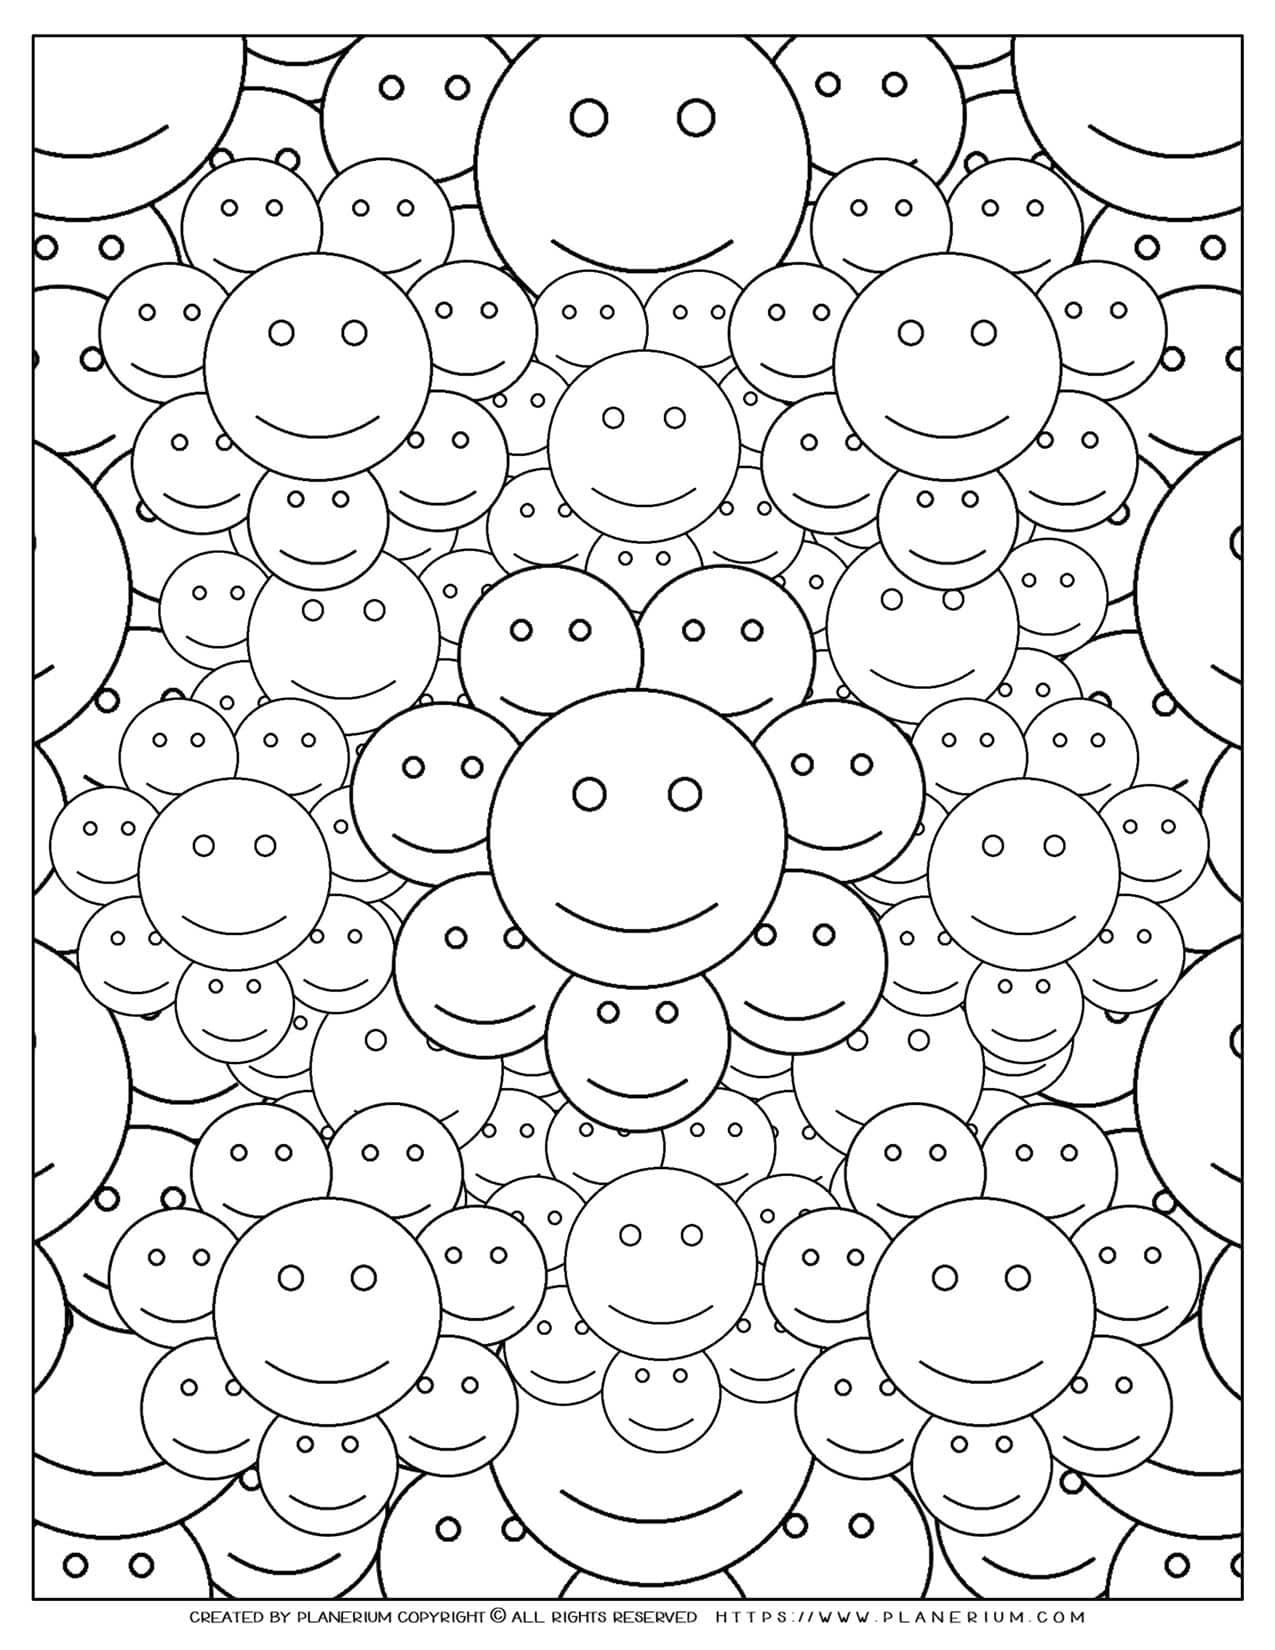 Adult coloring pages with smiley faces